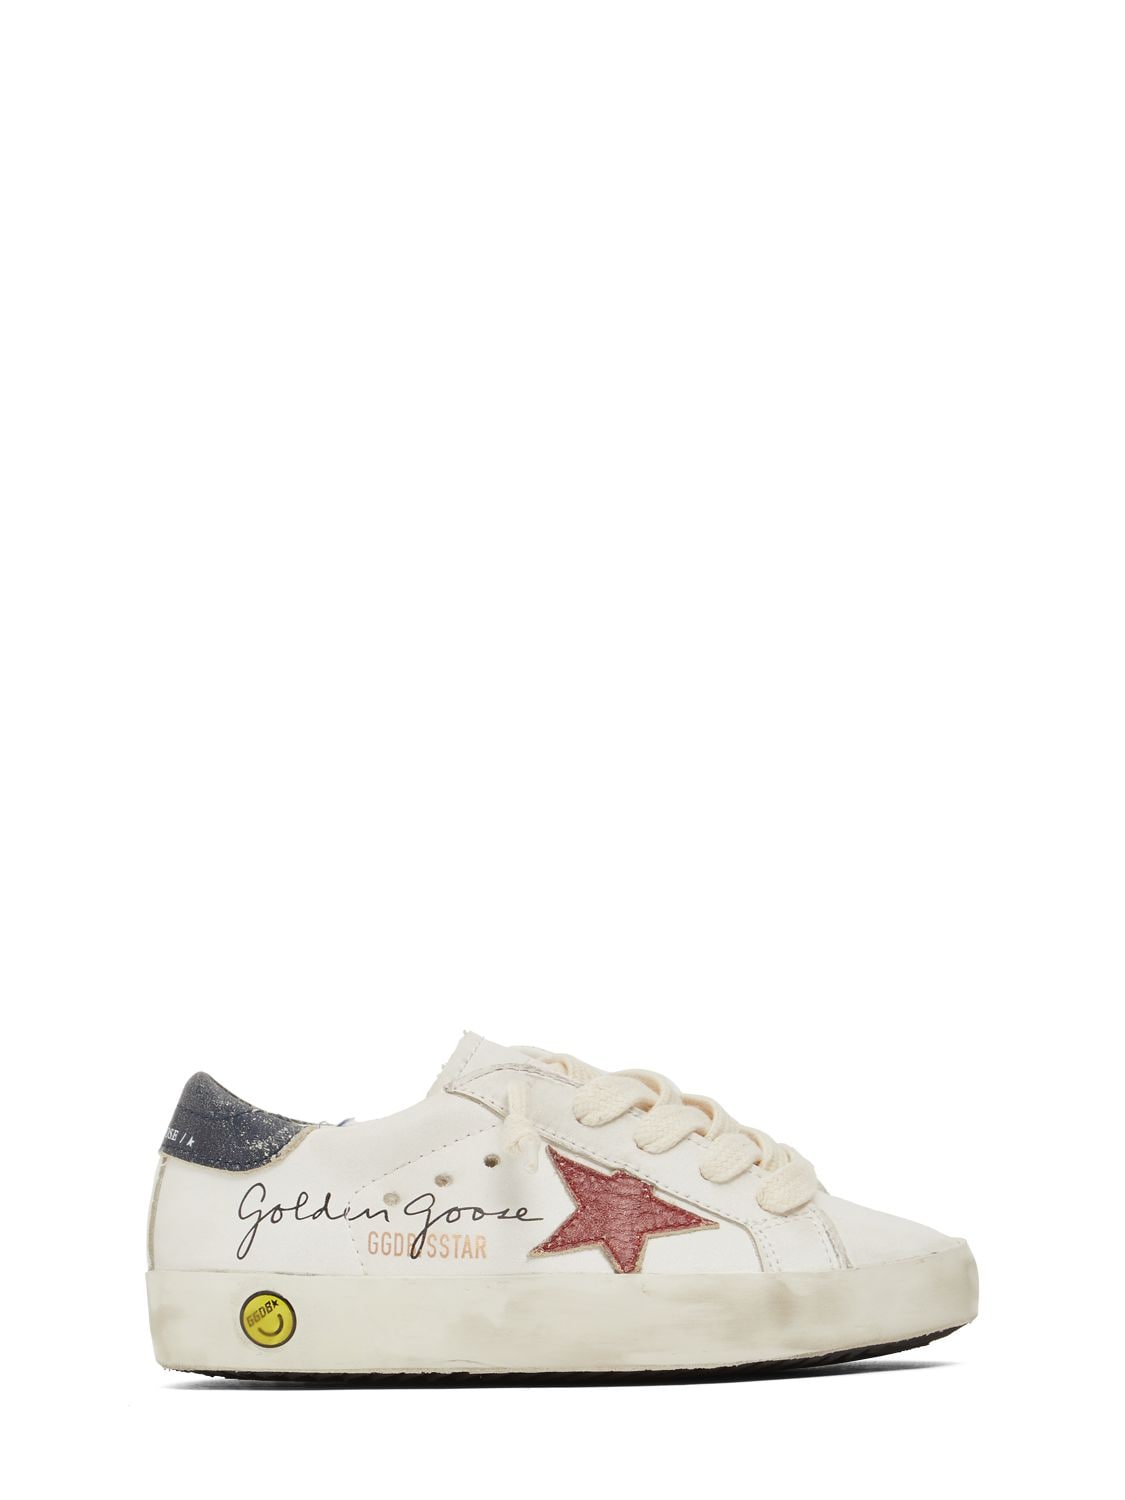 GOLDEN GOOSE SUPER-STAR LEATHER LACE-UP SNEAKERS